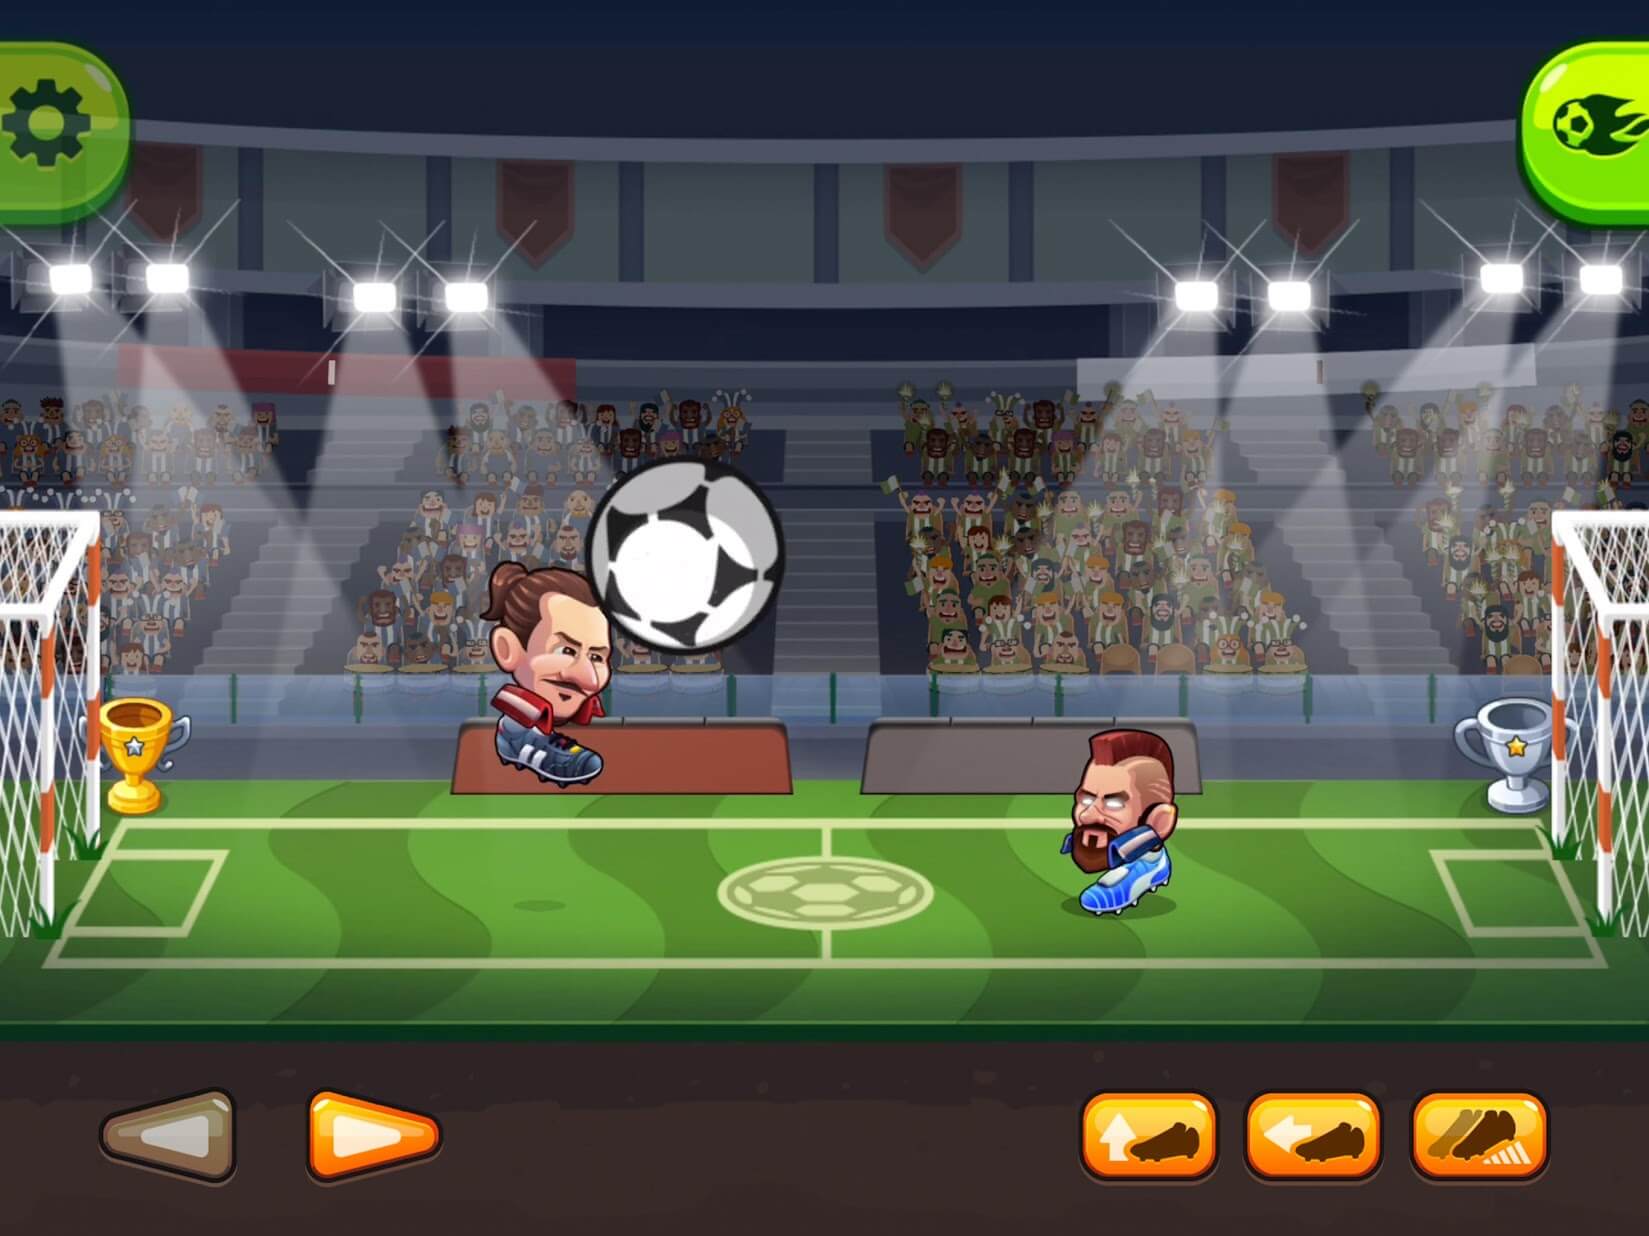 head ball 2 multiplayer game